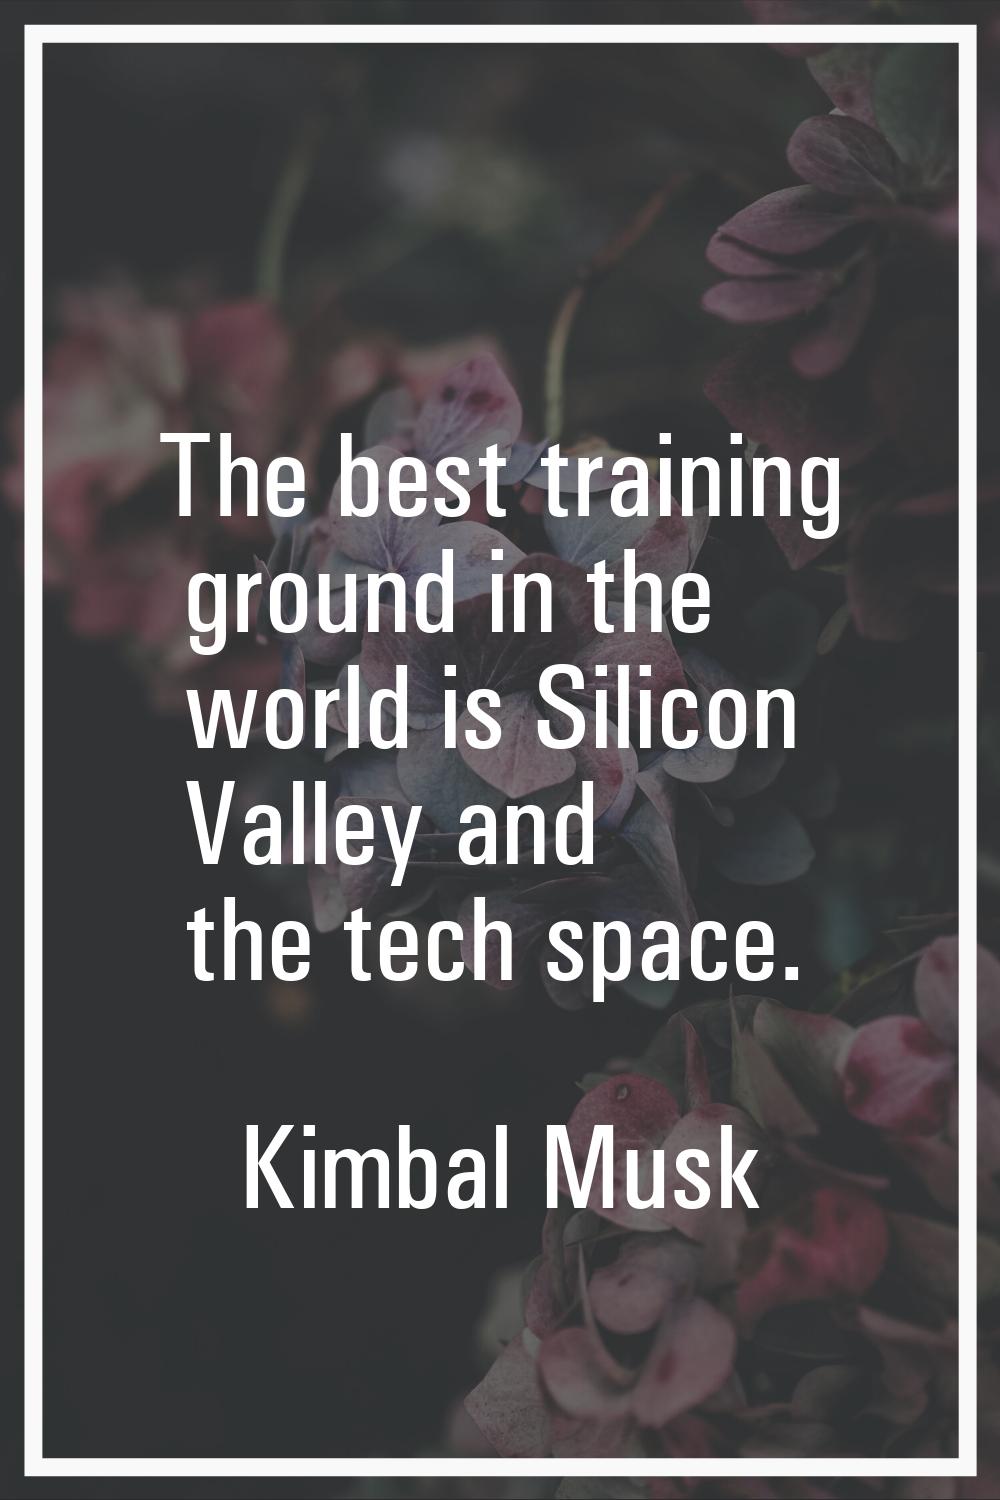 The best training ground in the world is Silicon Valley and the tech space.